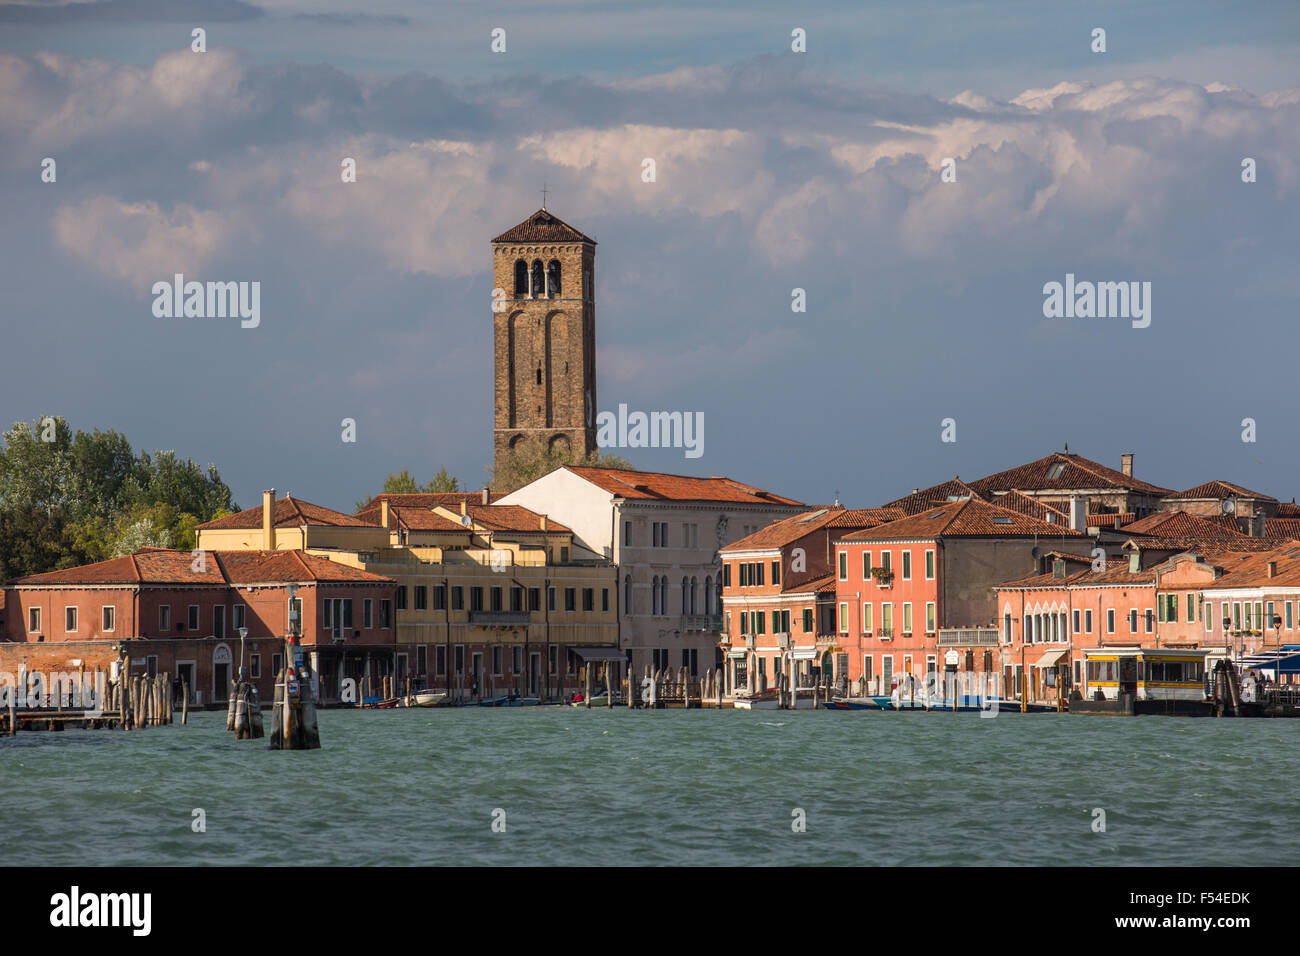 Murano, Venice, Italy, from the Lagoon, with church tower Stock Photo